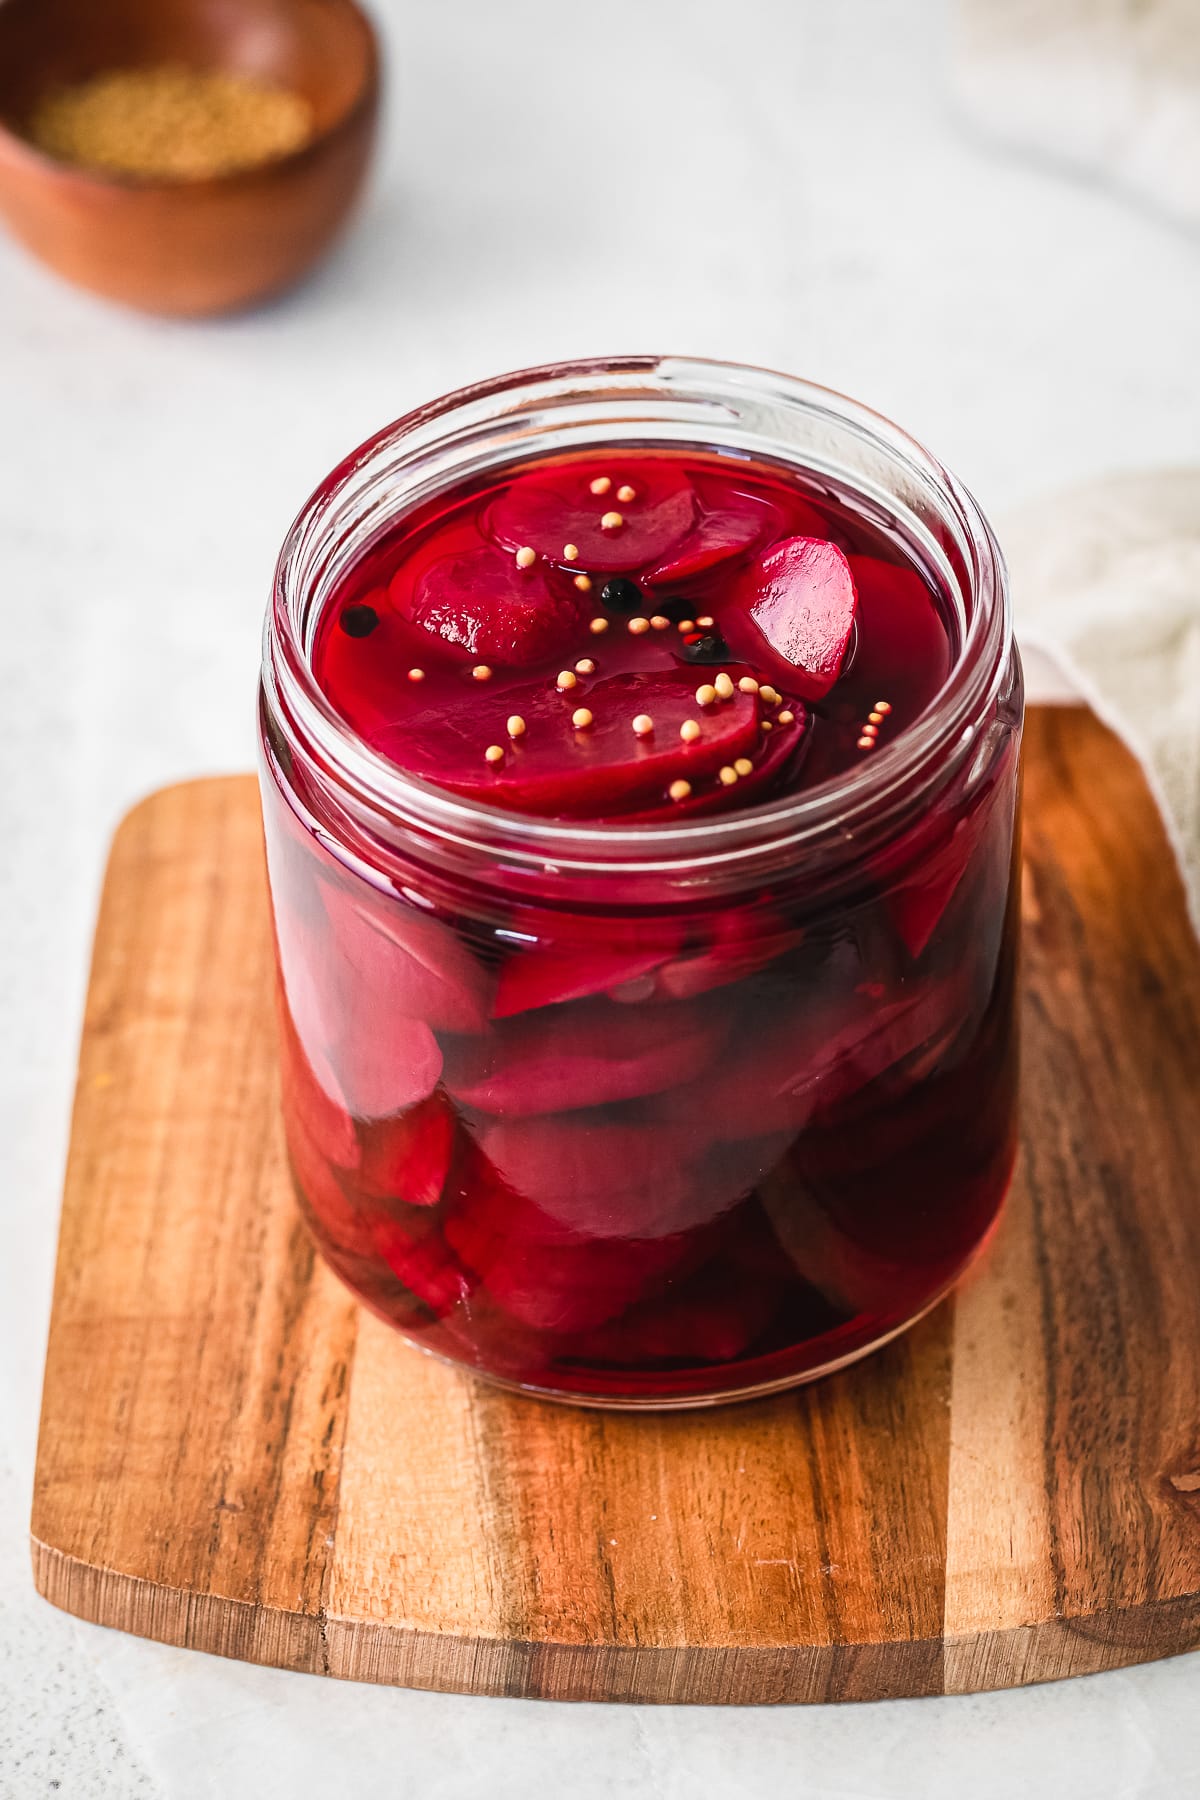 quick pickled beets in a glass jar on a wooden board.